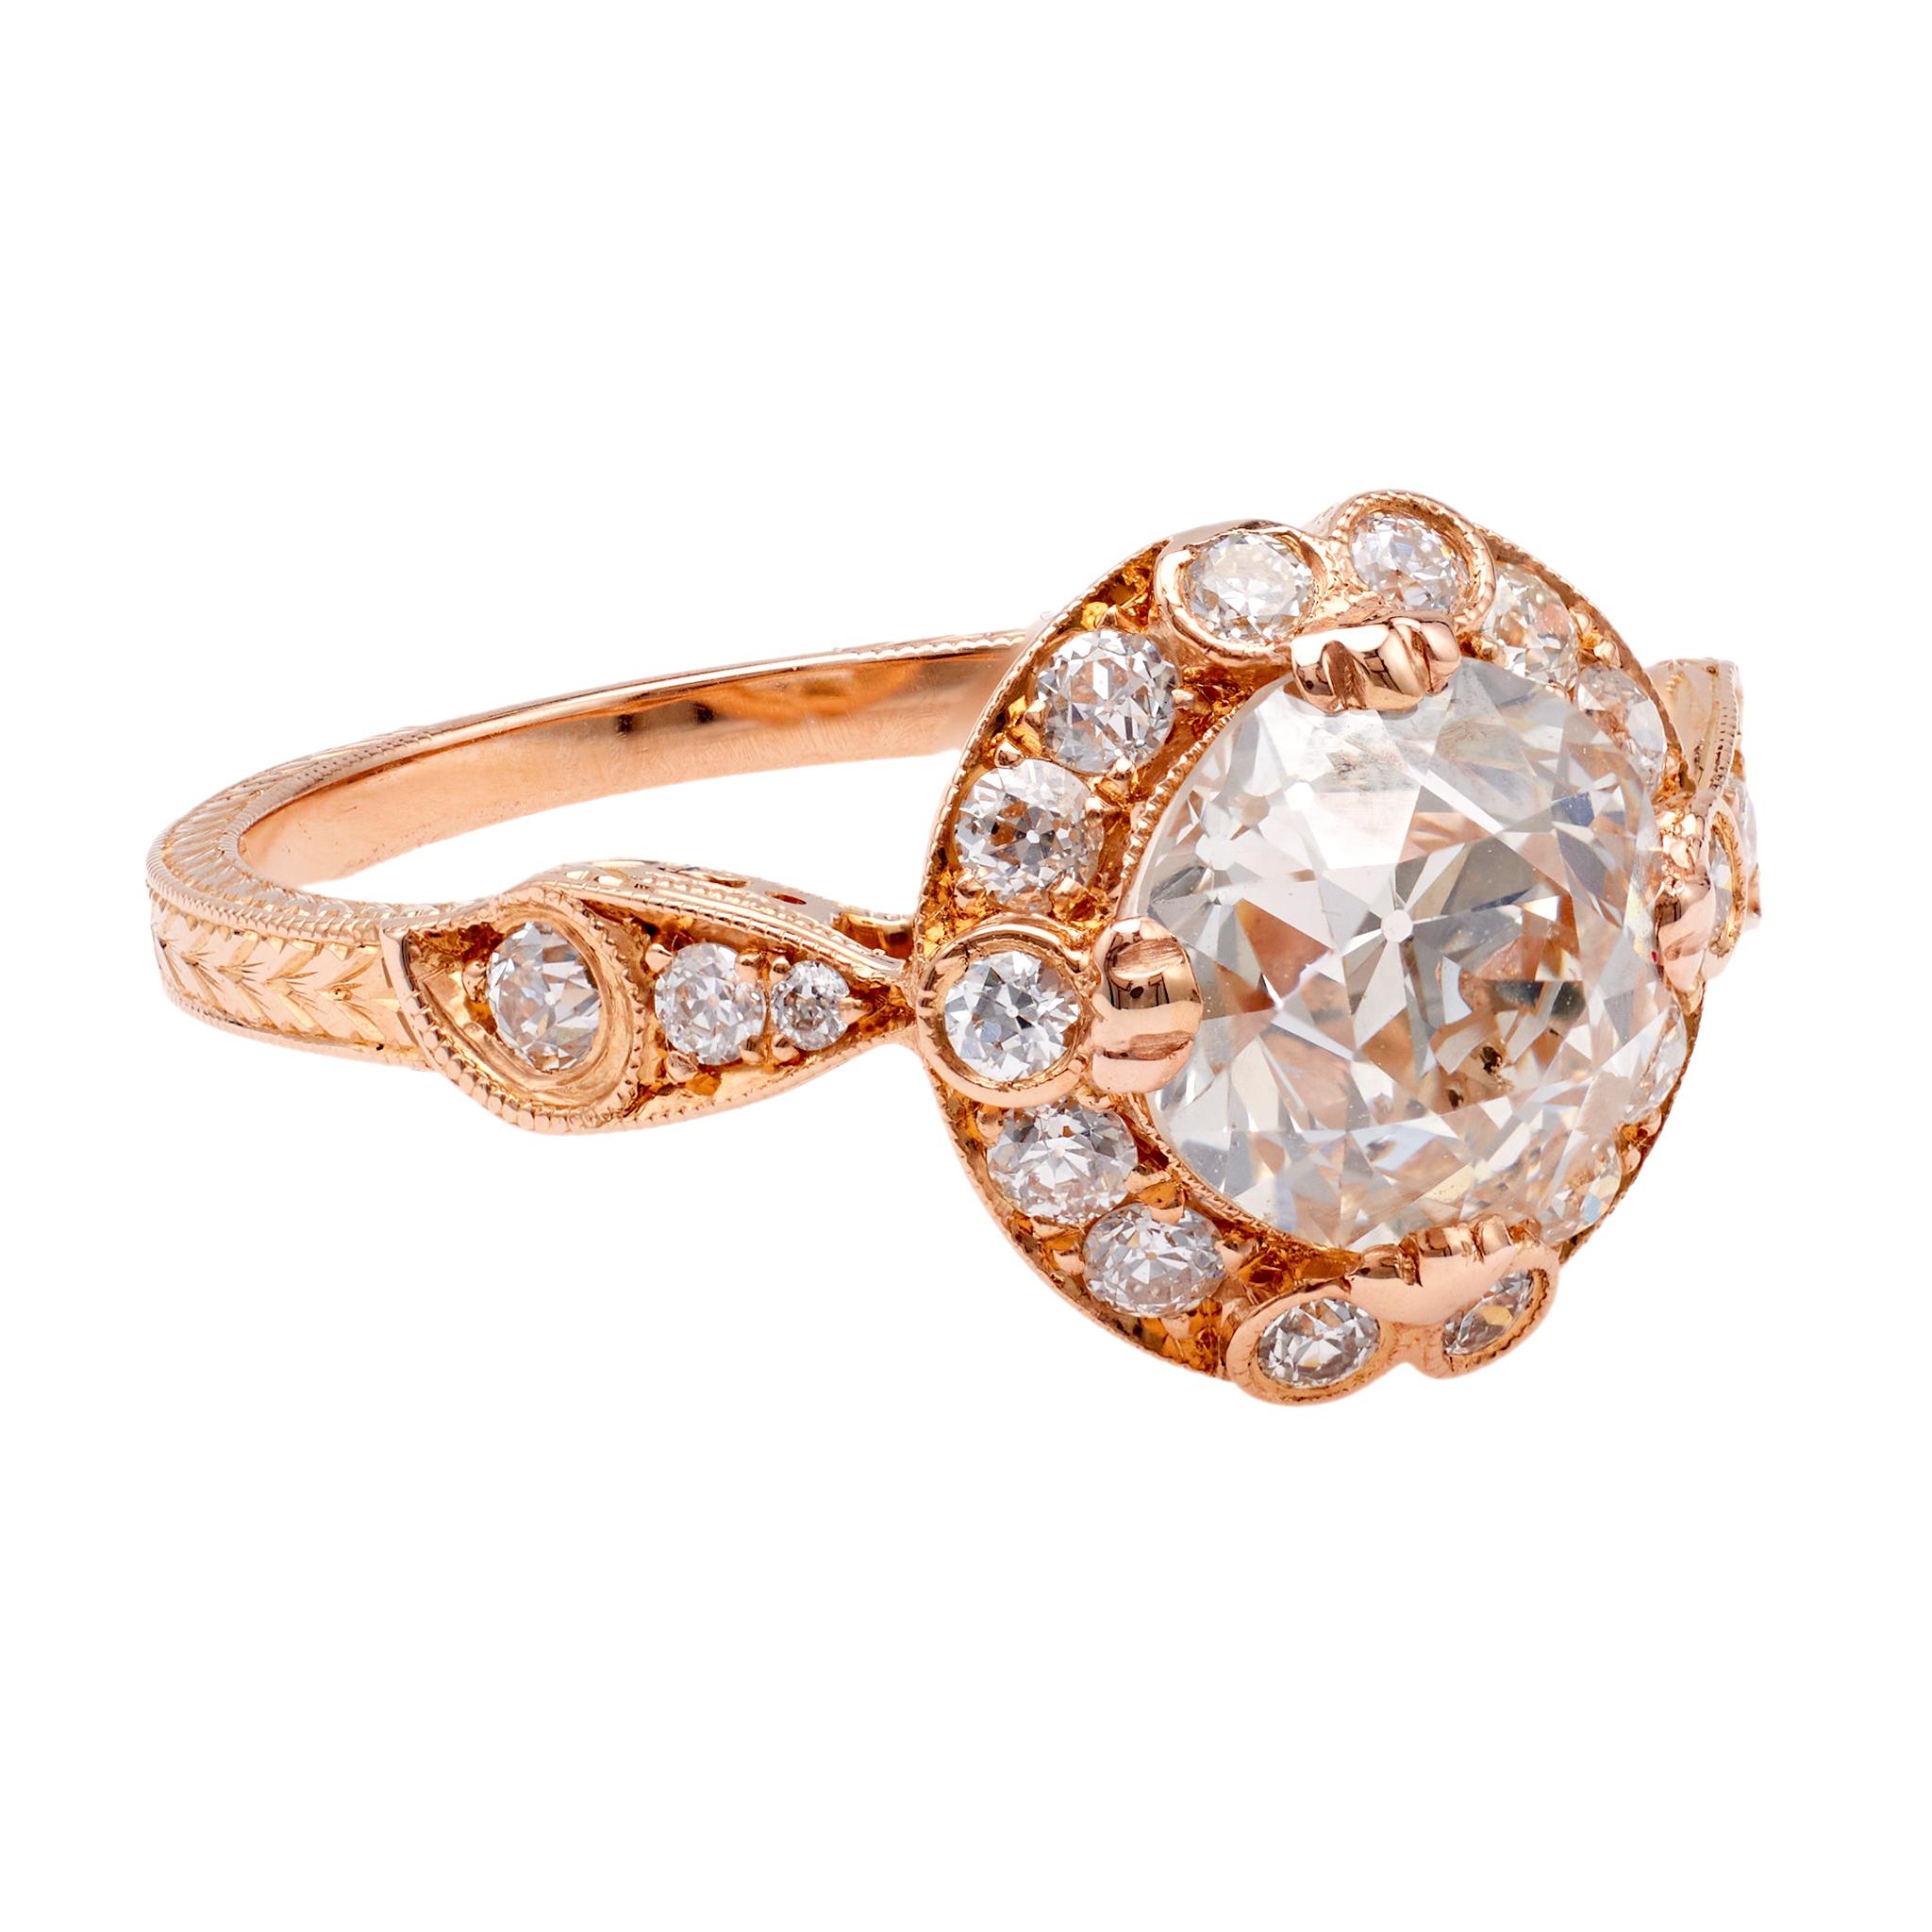 Antique Inspired GIA 1.51 Carats Old European Cut Diamond 18k Rose Gold Filigree For Sale 1